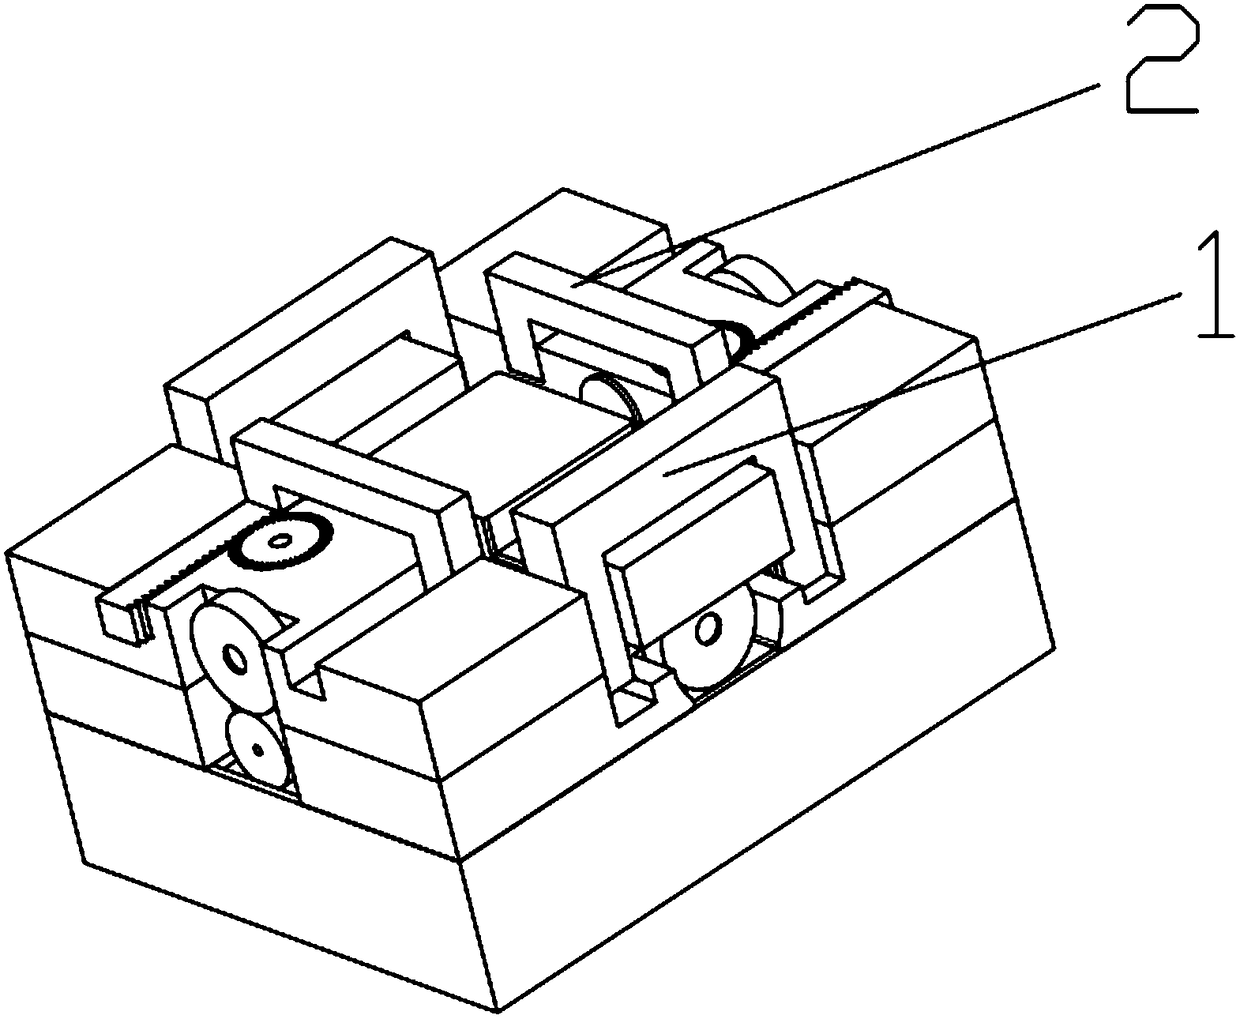 Clamp capable of adjusting workpiece position